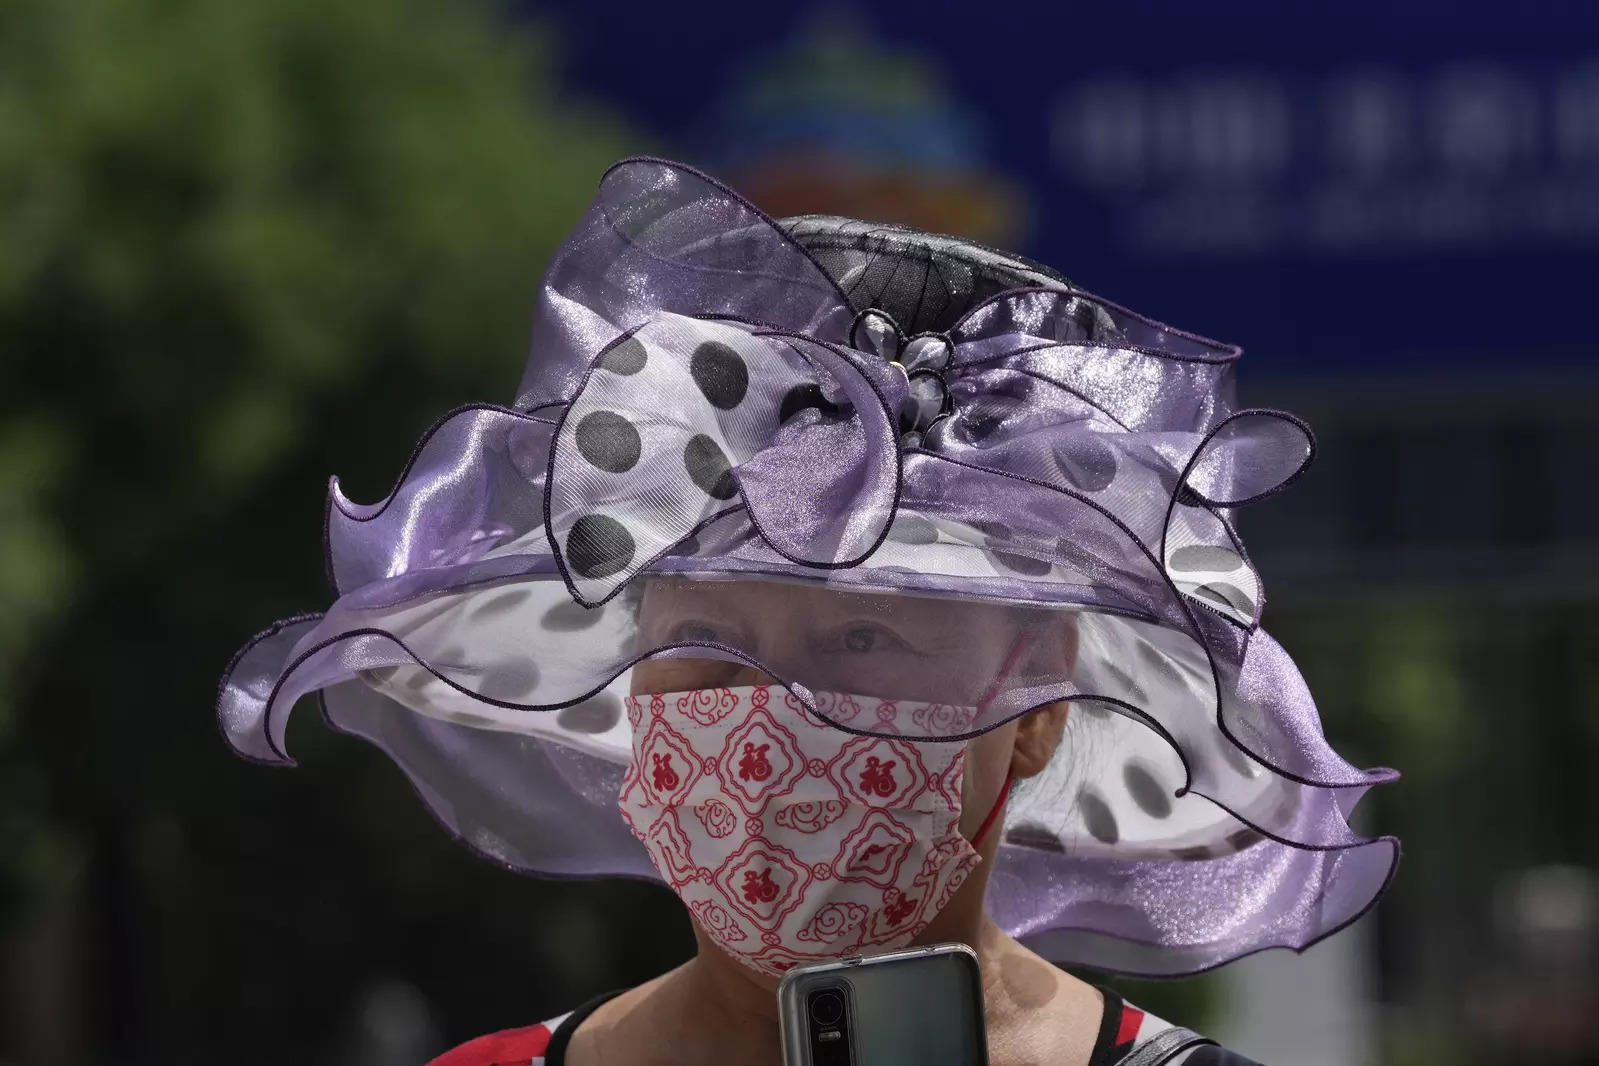  A woman wearing a mask and a colorful hat walks on the street, Thursday, July 7, 2022, in Beijing. (AP Photo/Ng Han Guan)